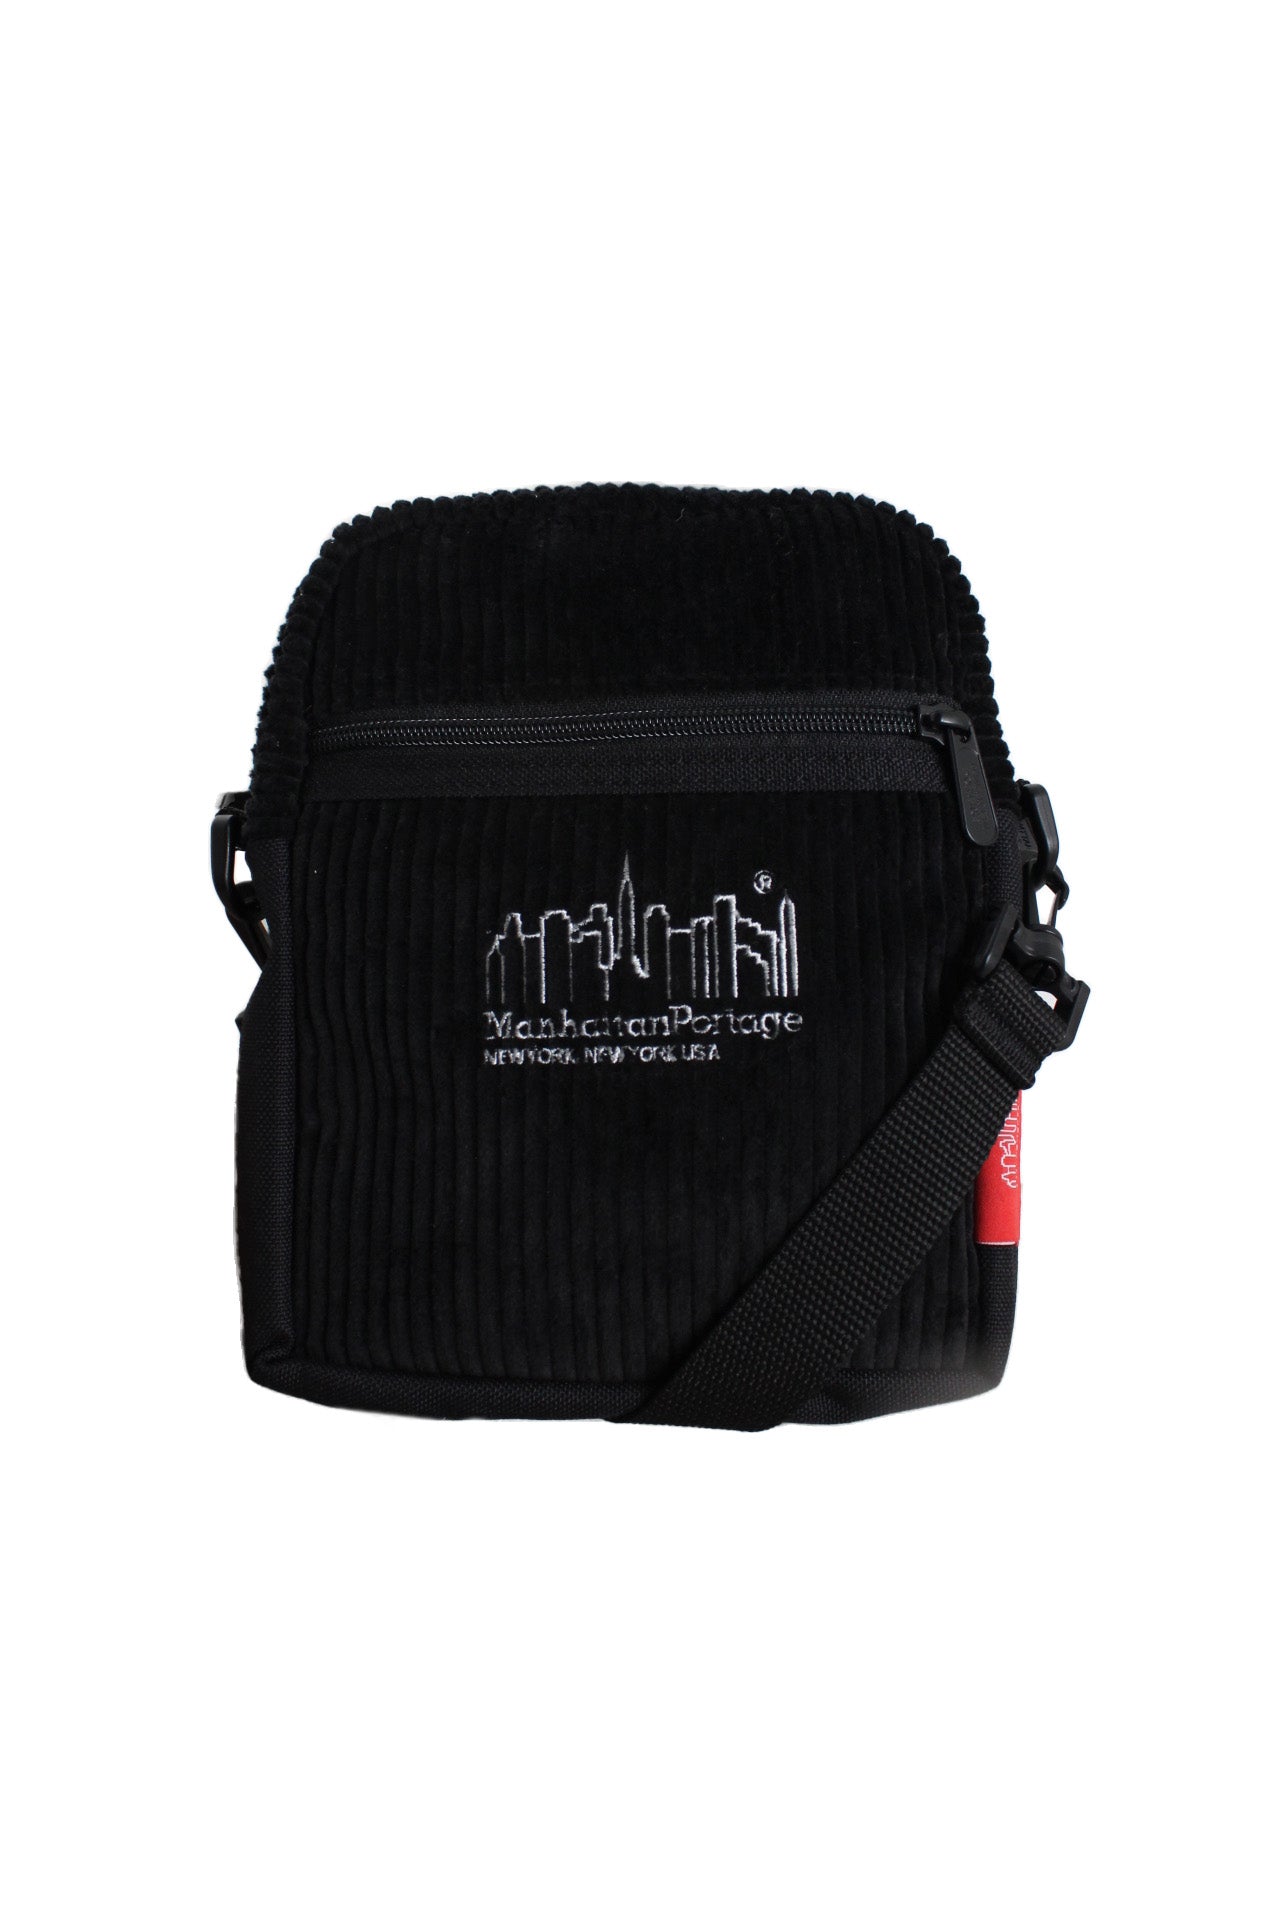 front view of the manhattan portage x brisbane moss black corduroy cross body bag. features top zip main compartment, front zip slot pocket, adjustable/removable shoulder strap, ‘manhattan portage new york new york usa’ logo embroidered at front side, ‘brisbane moss jine quality fabrics tradition in unison’ logo tab at back side, and ‘manhattan portage’ logo tab at side.